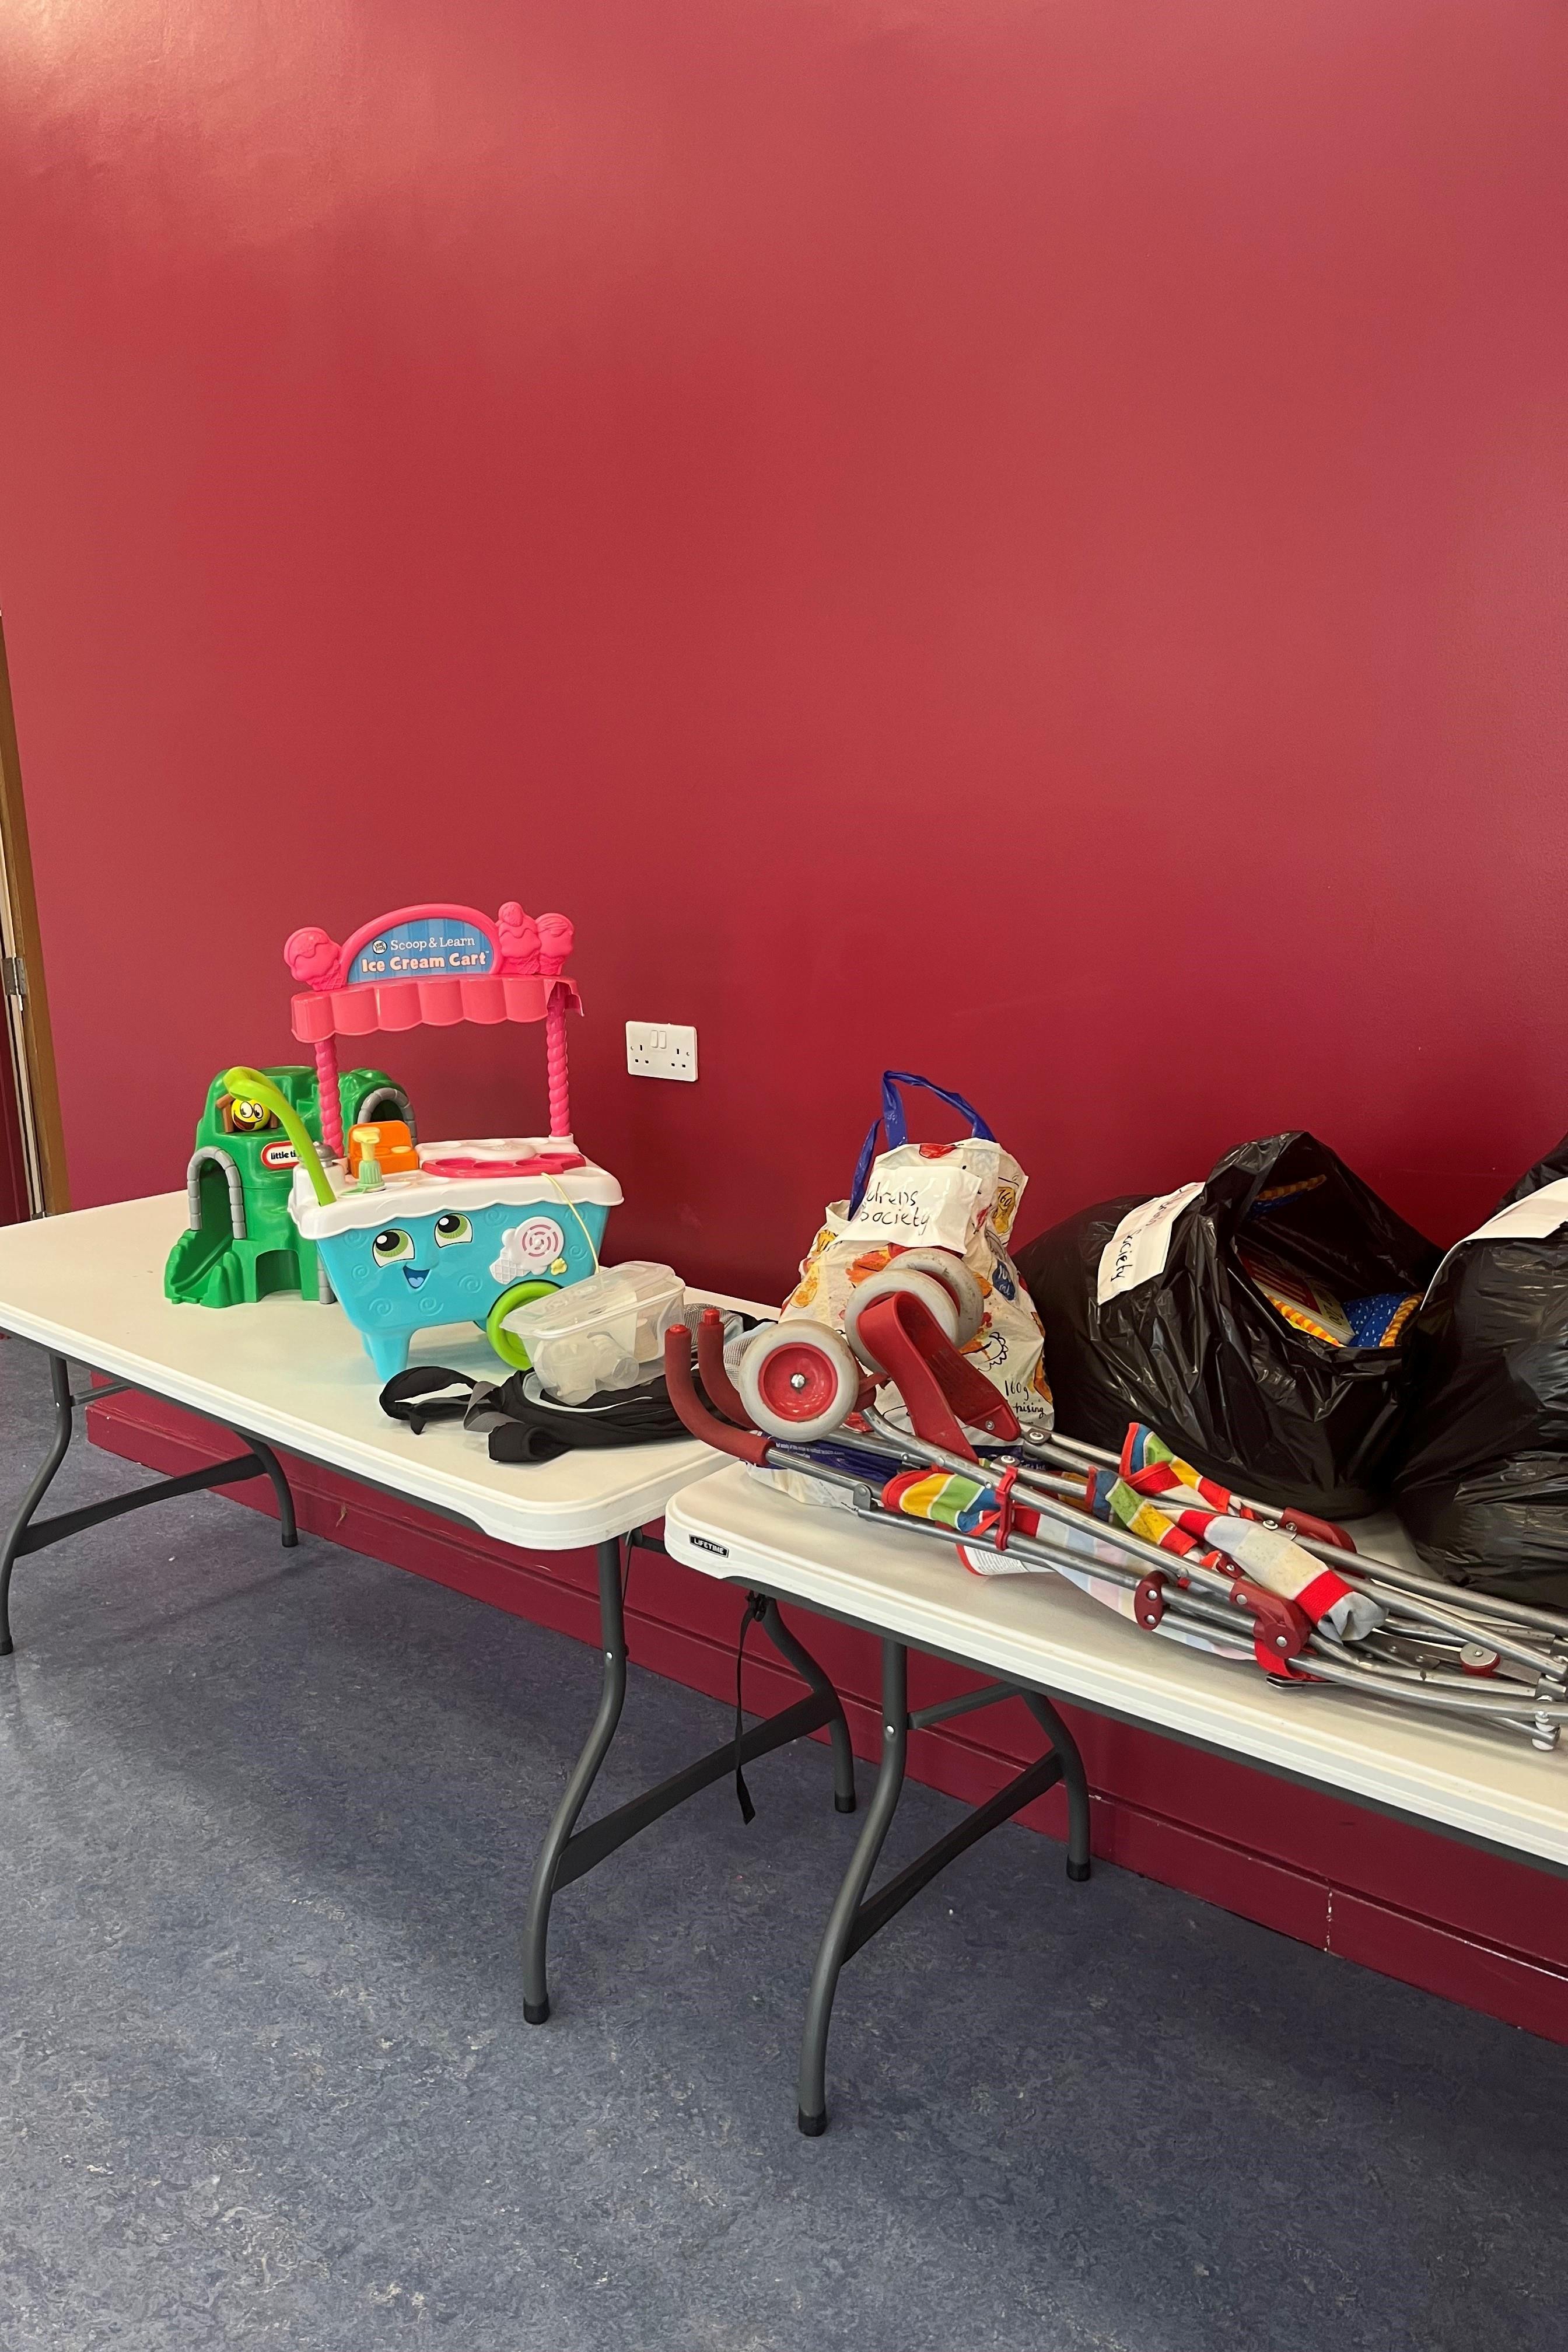 Items on a donations table